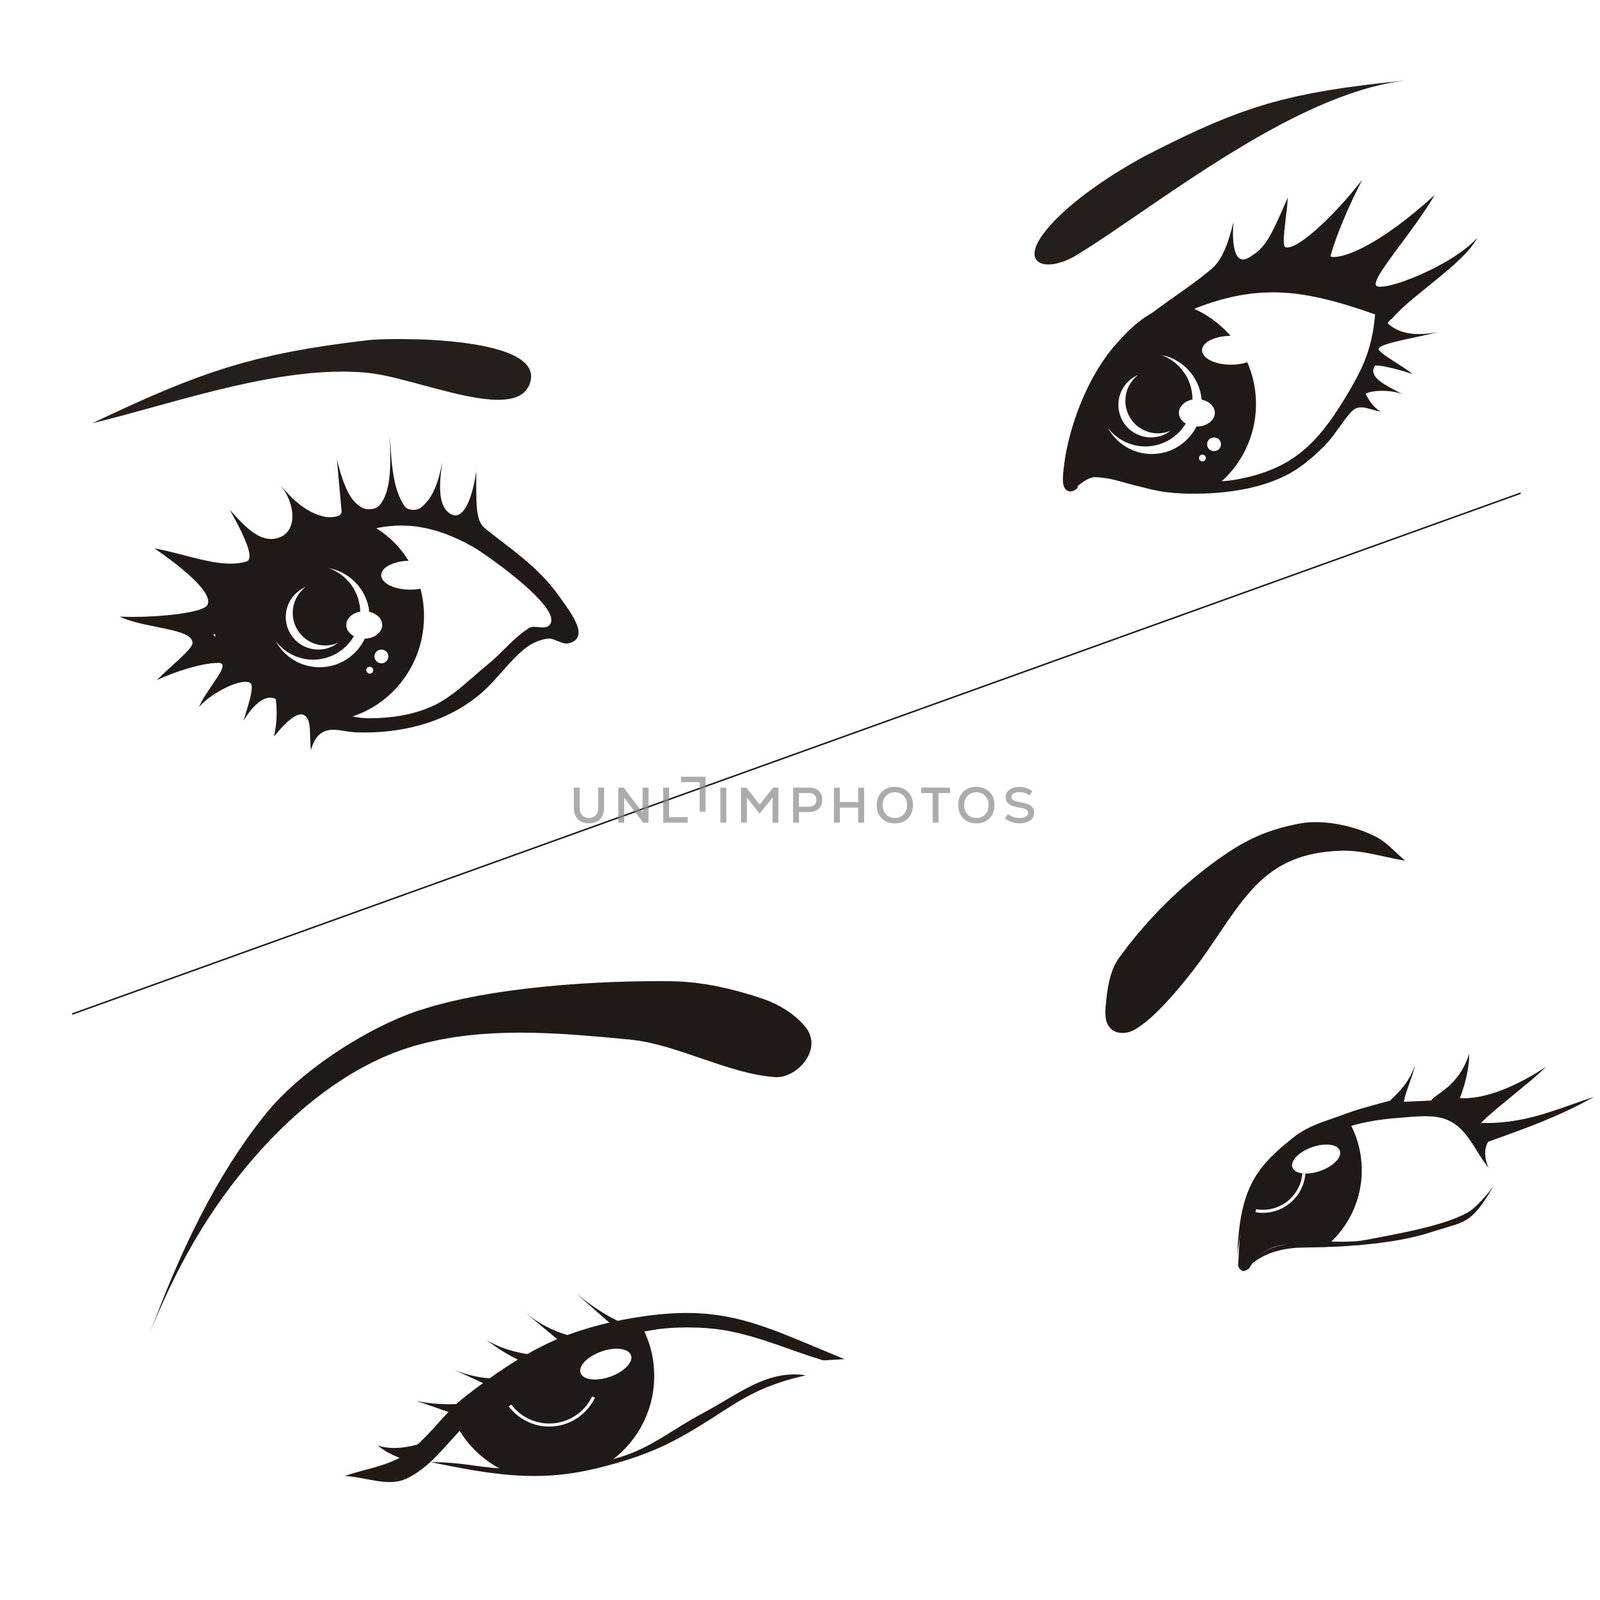 Woman's eyes by nat